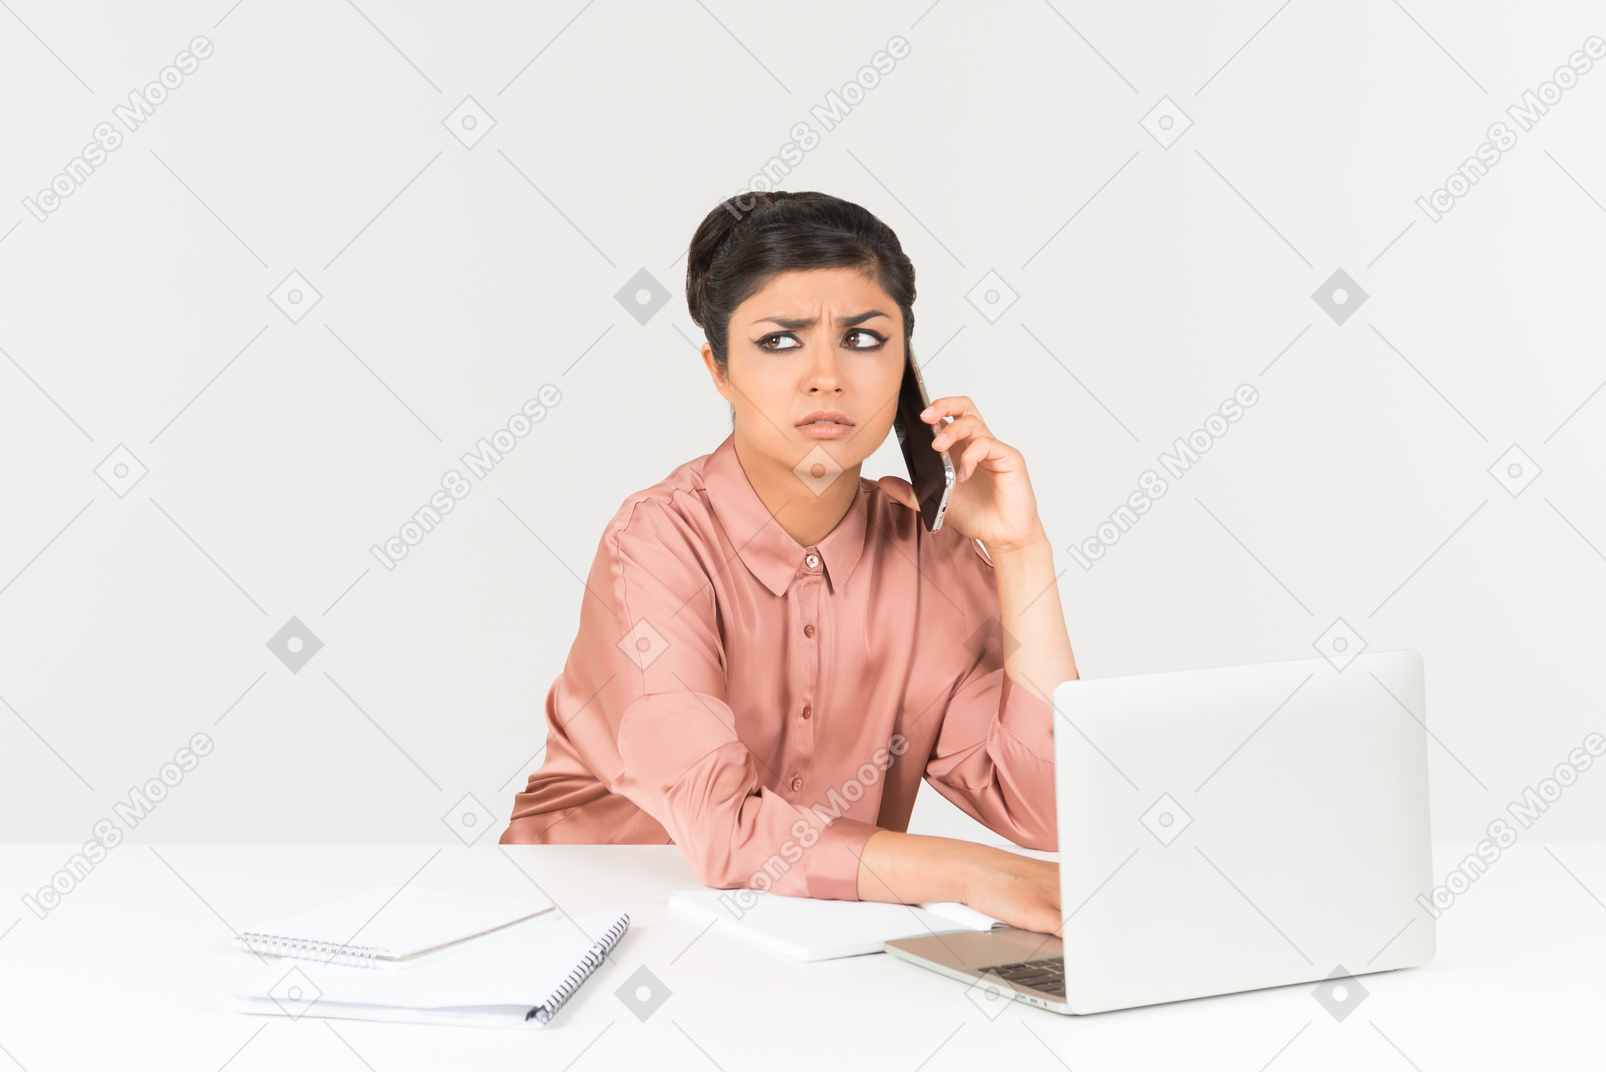 Bothered looking young indian woman talking on the phone and working on laptop